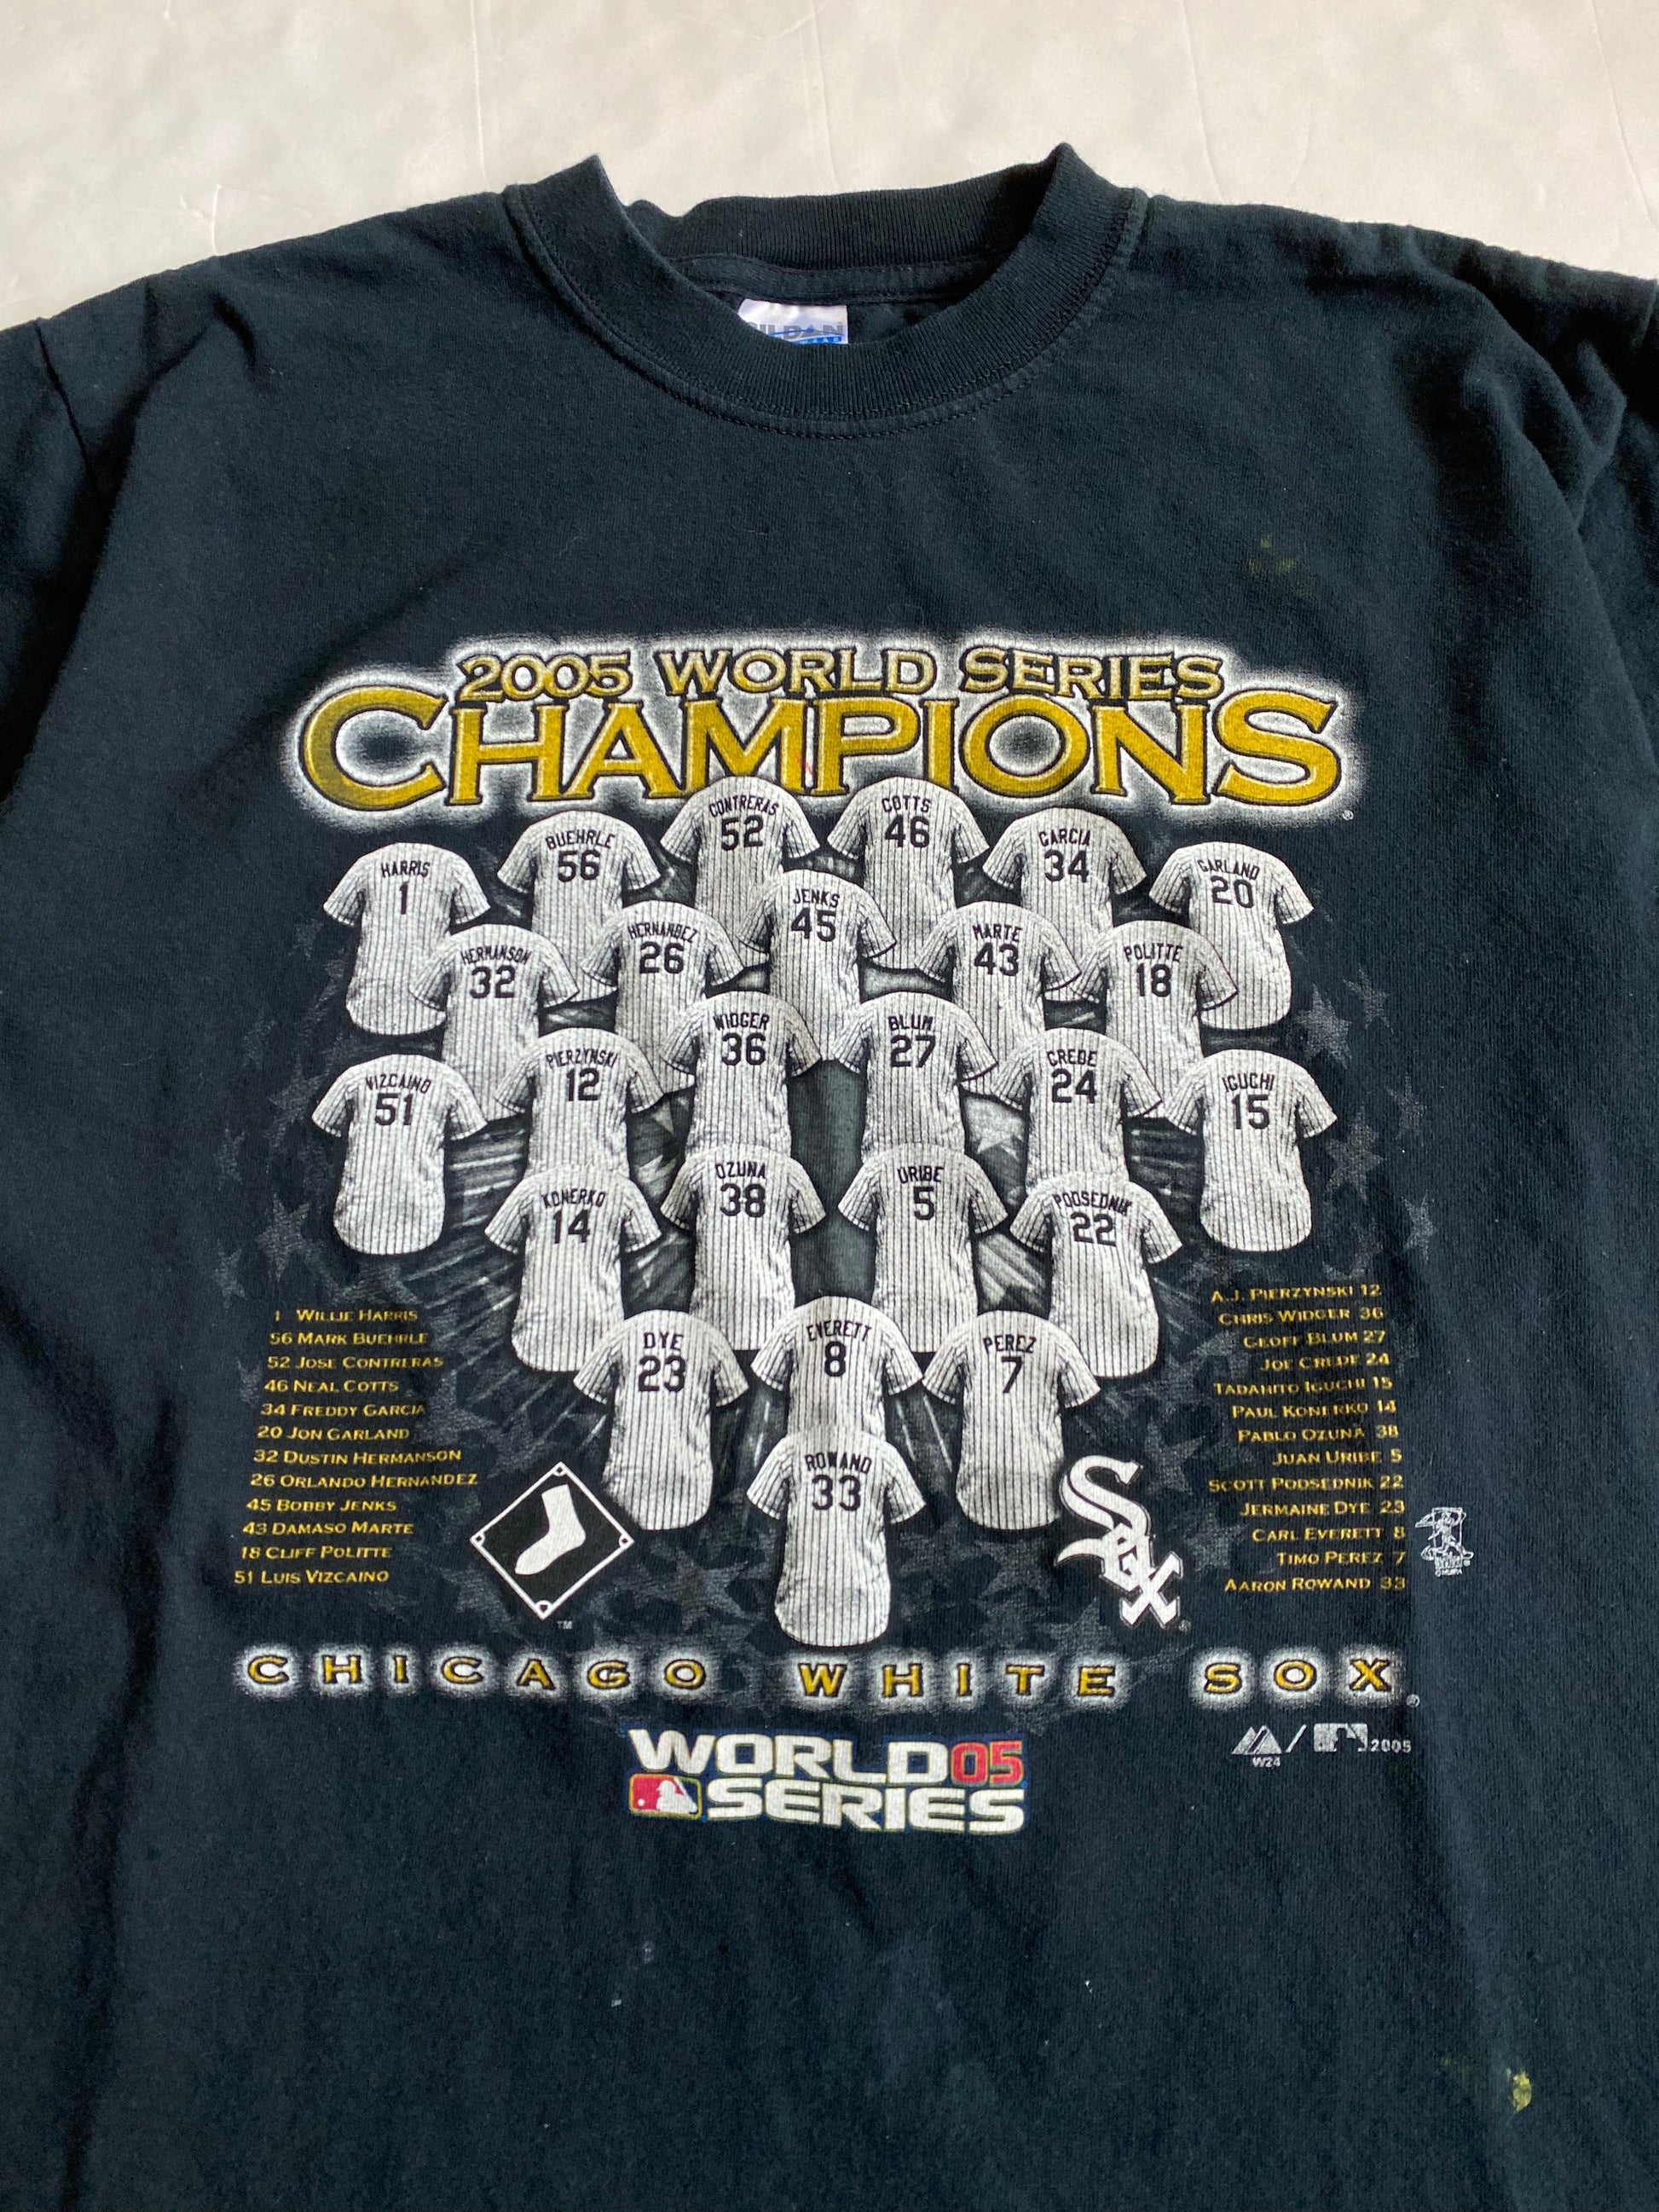 Chicago White Sox 2005 World Series Champons 02 Women's T-Shirt by